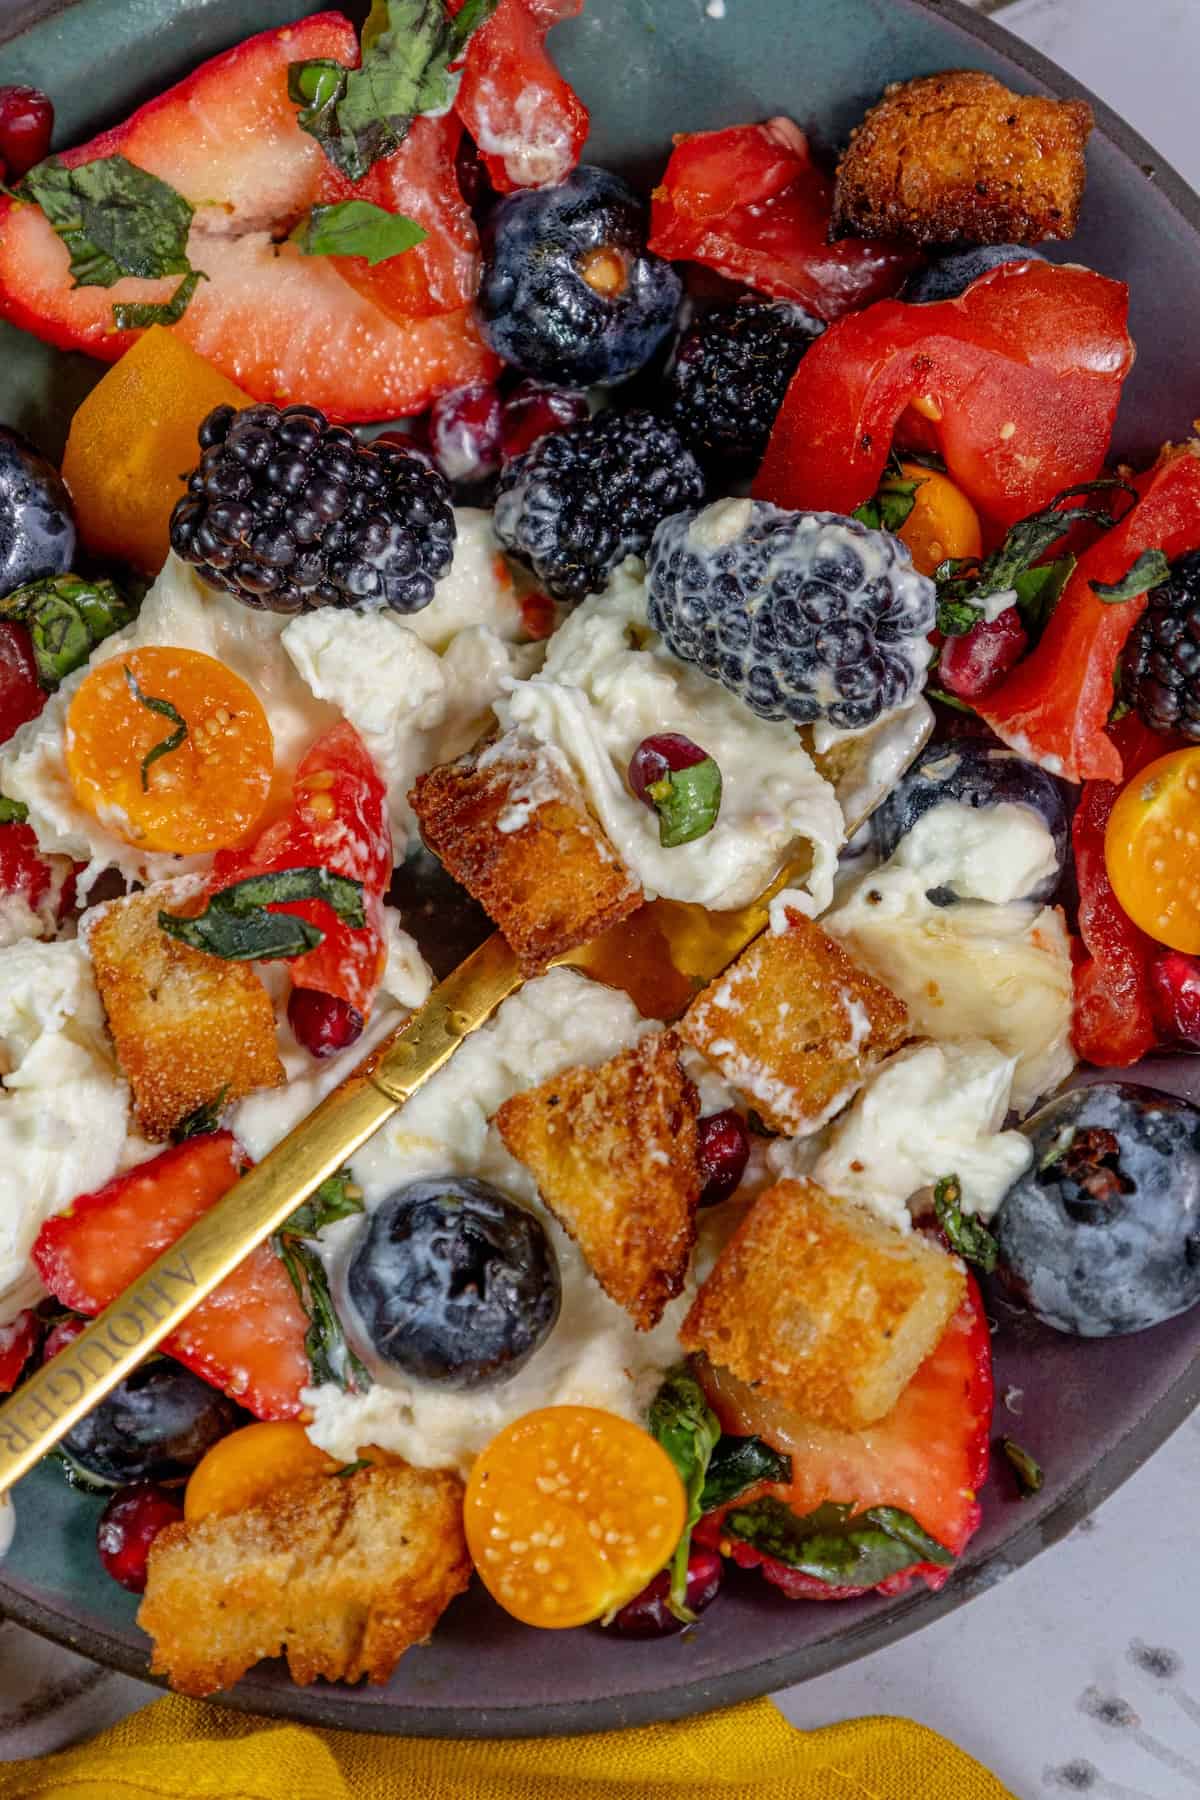 A bowl of fruit salad with berries.